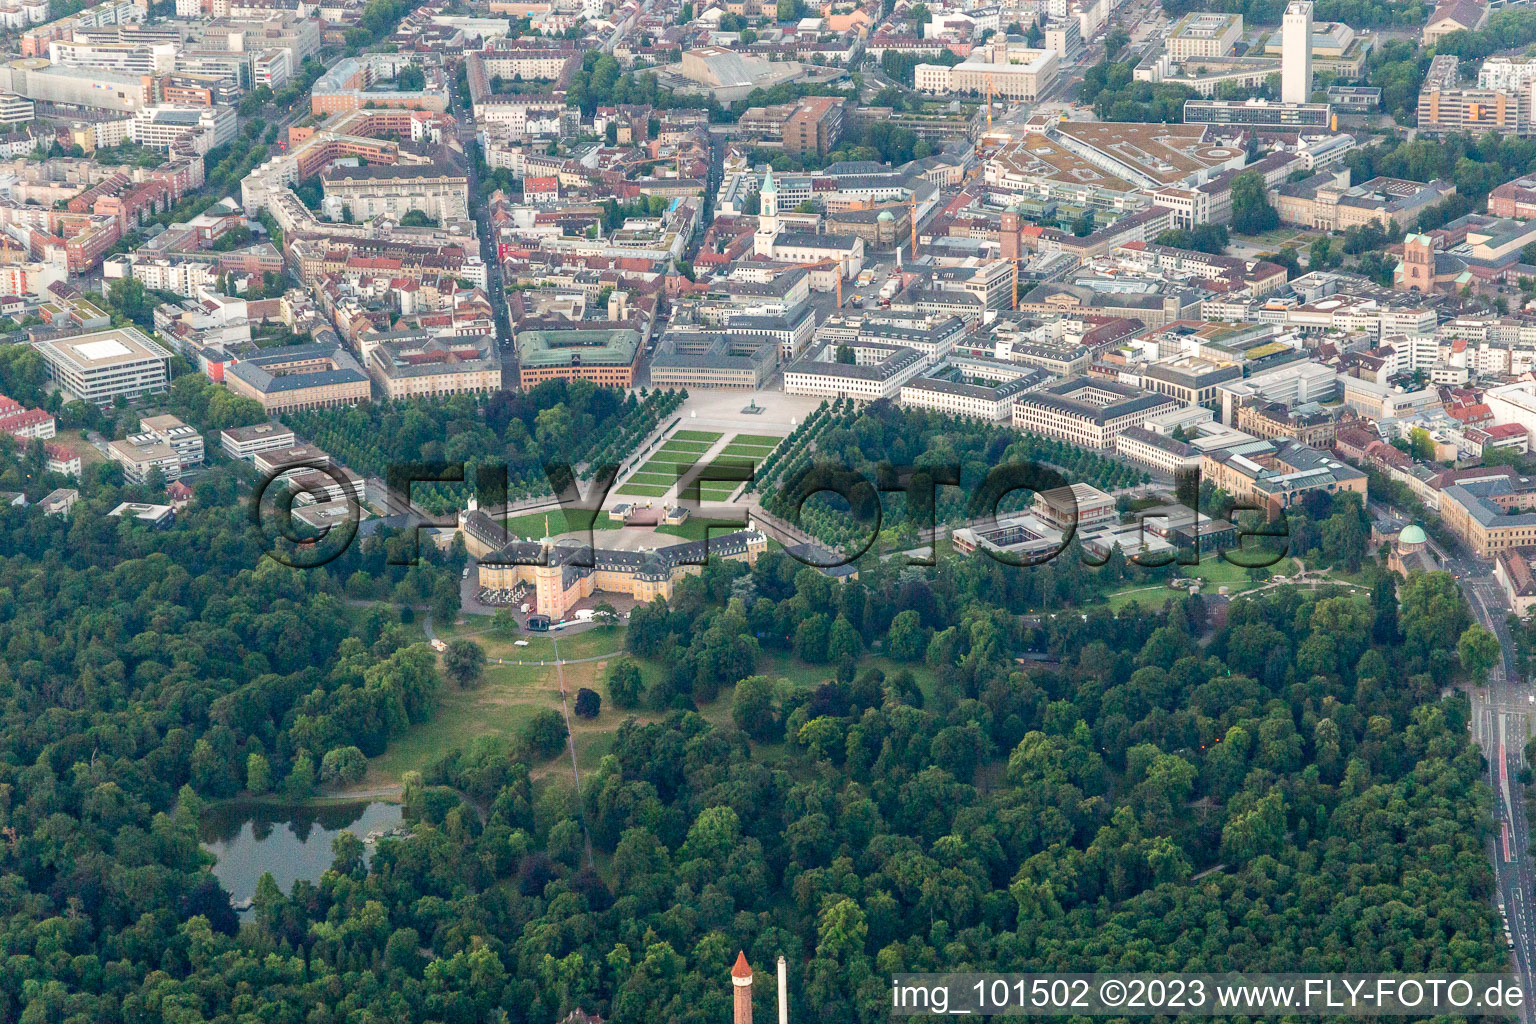 Aerial photograpy of Castle park in the district Innenstadt-West in Karlsruhe in the state Baden-Wuerttemberg, Germany